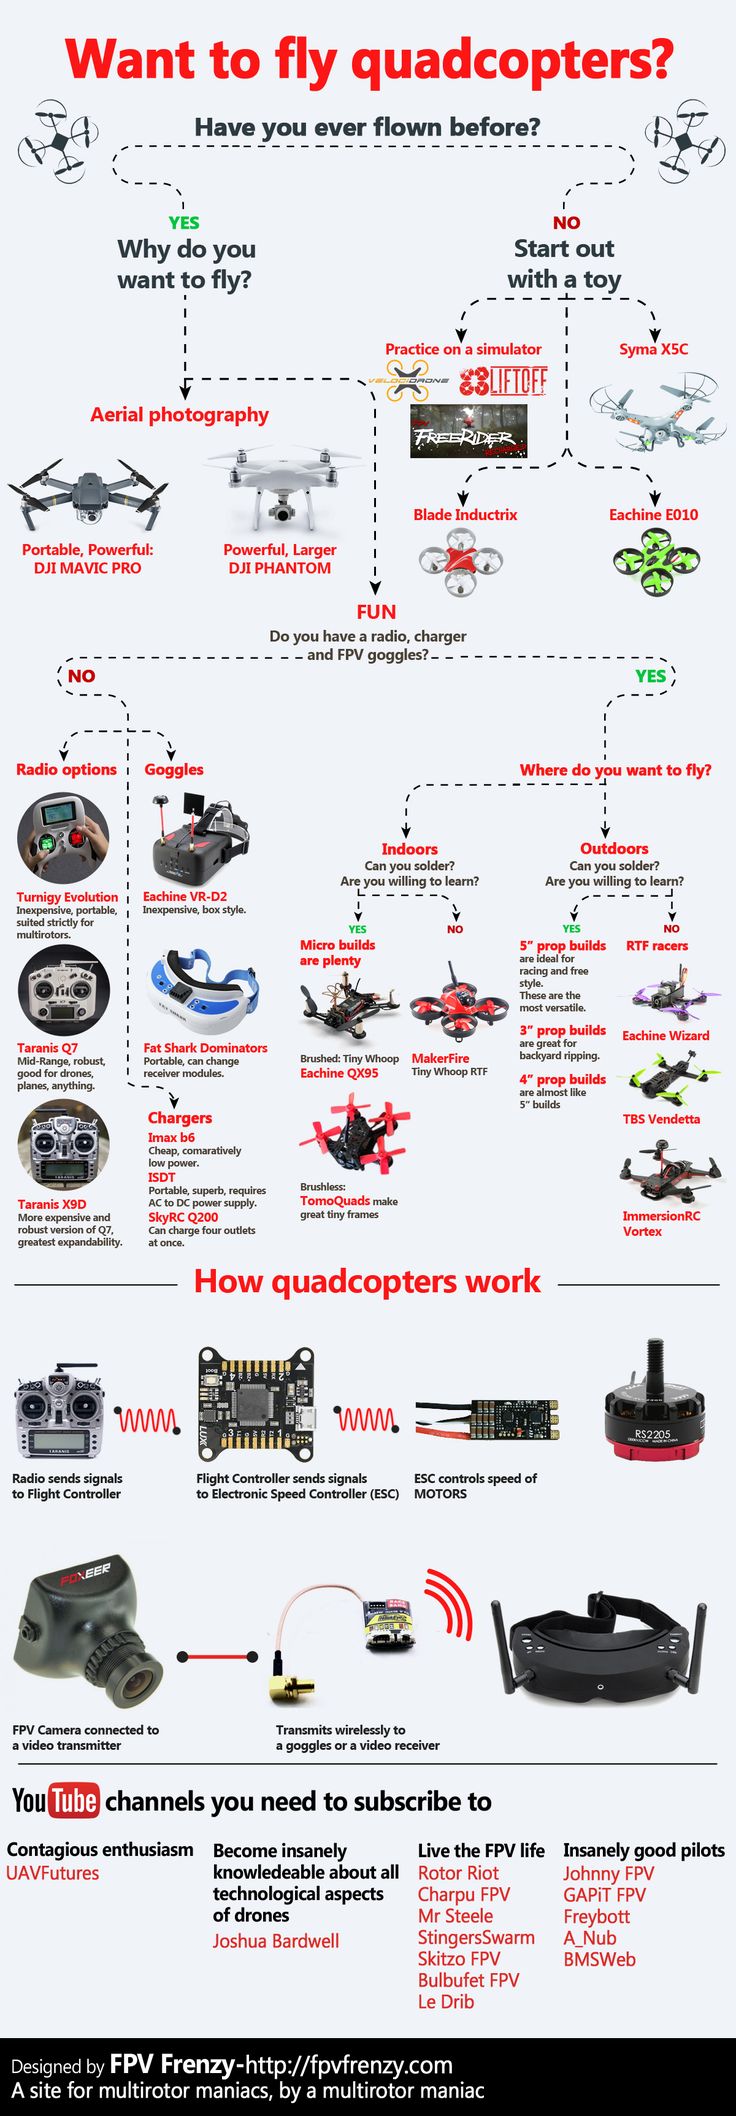 do-you-want-to-fly-drones.jpg (1200×3450)